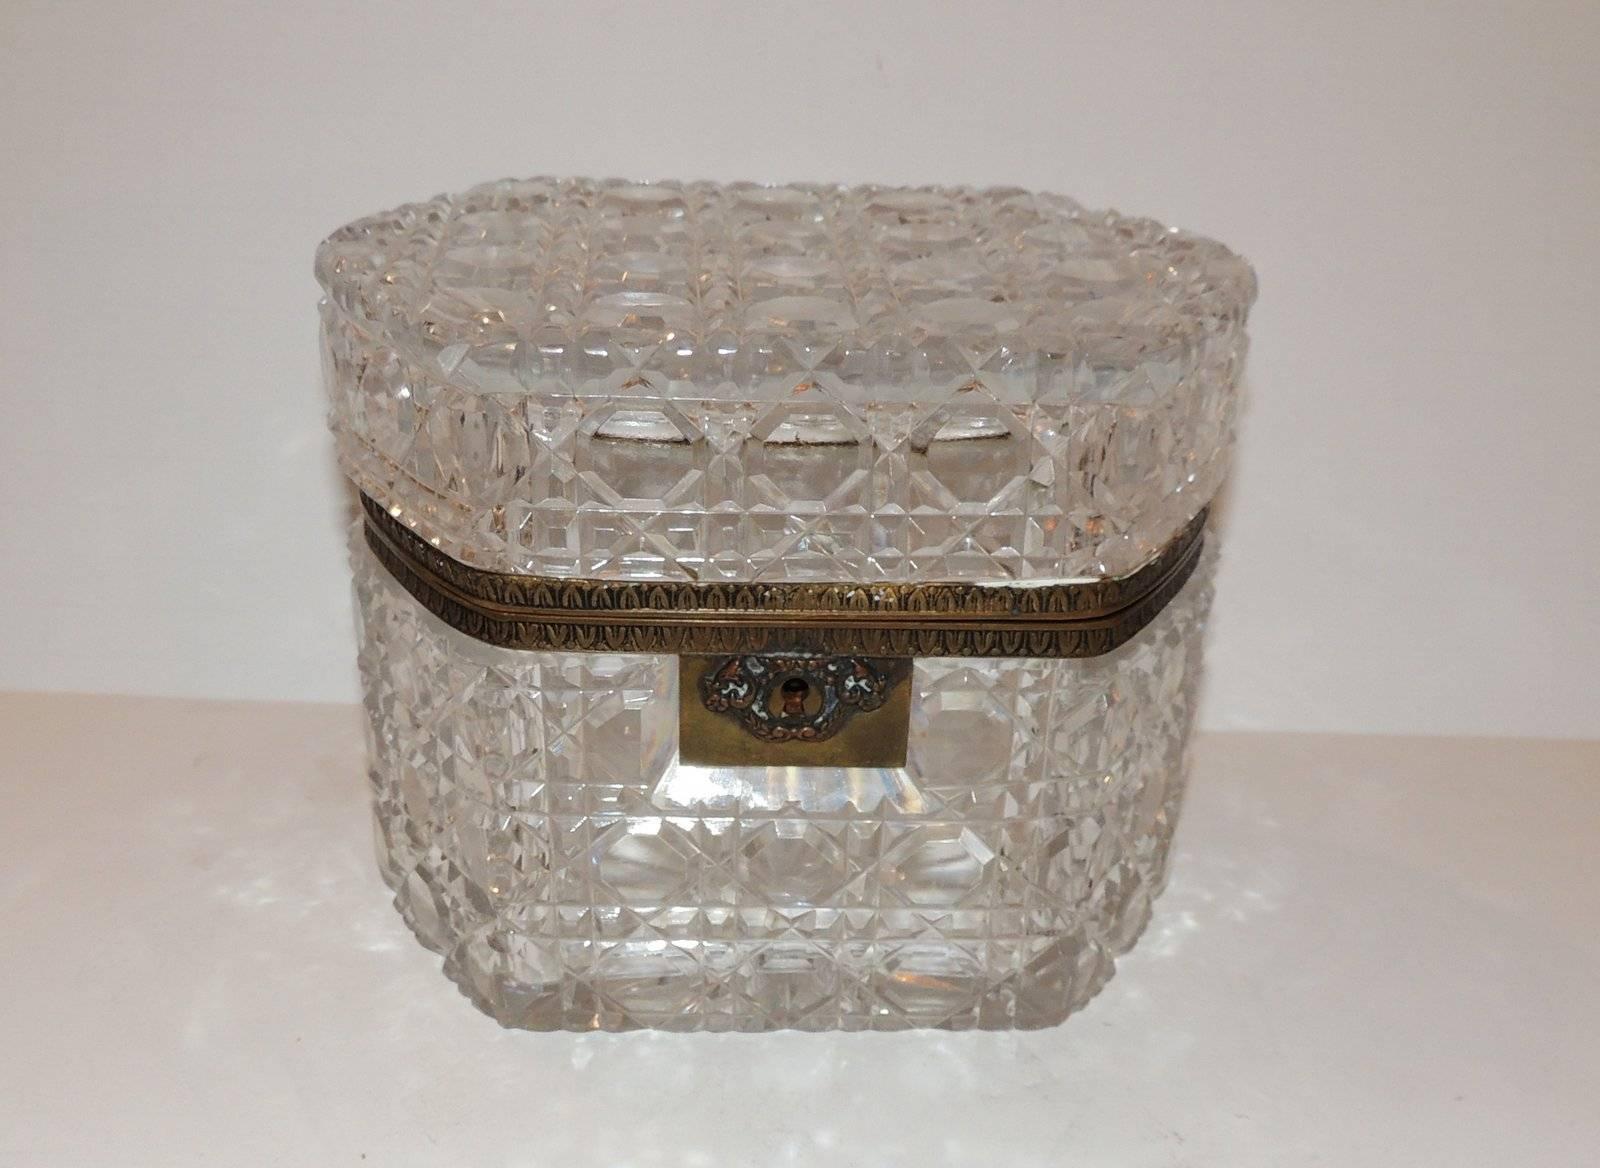 A wonderful French faceted cut crystal bronze ormolu-mounted six sided casket jewelry box with fine detail bronze key hole.